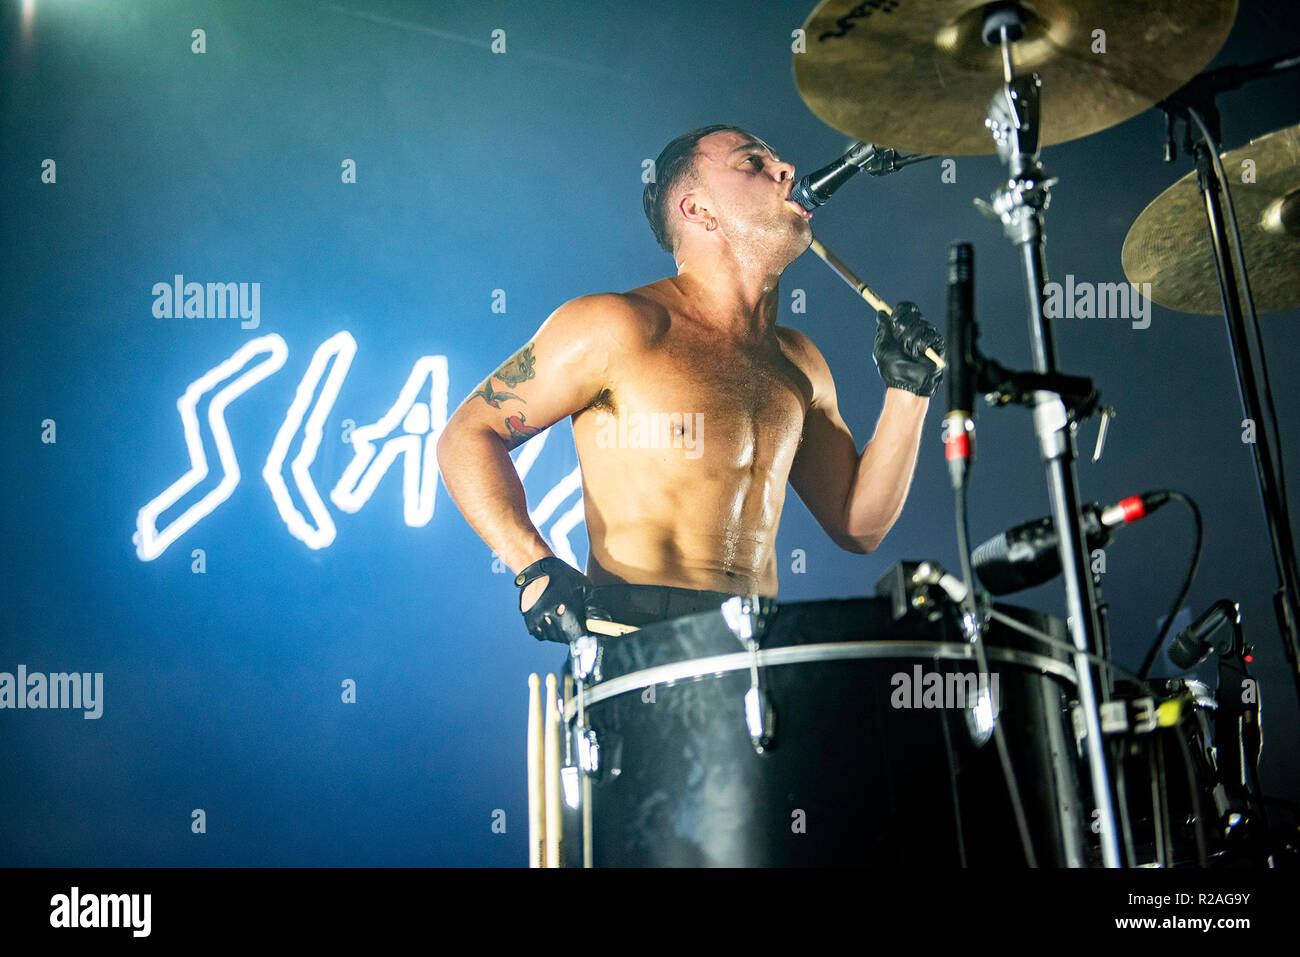 Manchester, UK. 17th November 2018. Isaac Hoffman and Laurie Vincent of Slaves perform at the Manchester Academy on their UK tour, Manchester 17/11/2018 Credit: Gary Mather/Alamy Live News Stock Photo